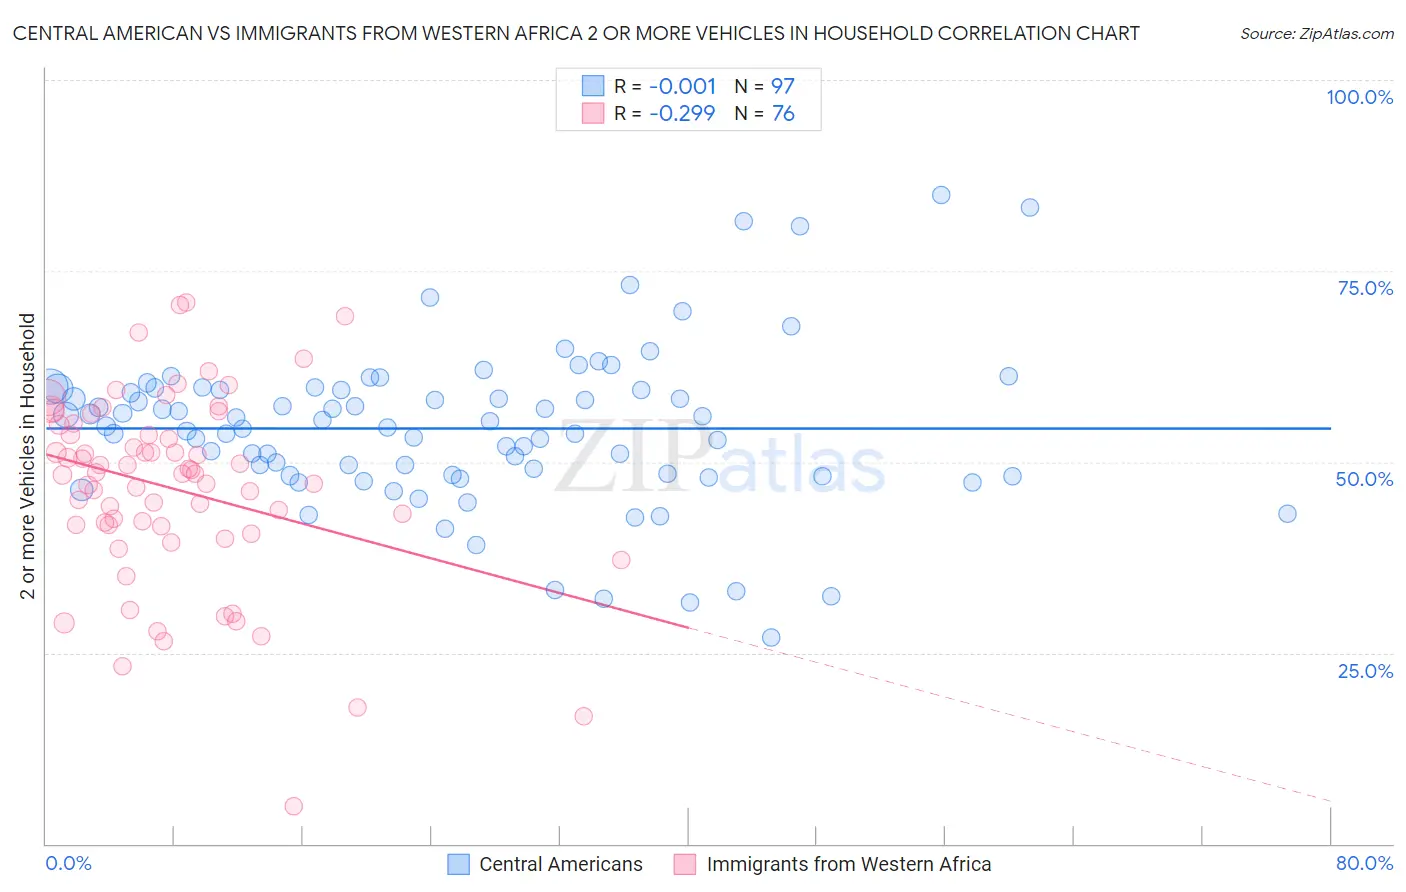 Central American vs Immigrants from Western Africa 2 or more Vehicles in Household